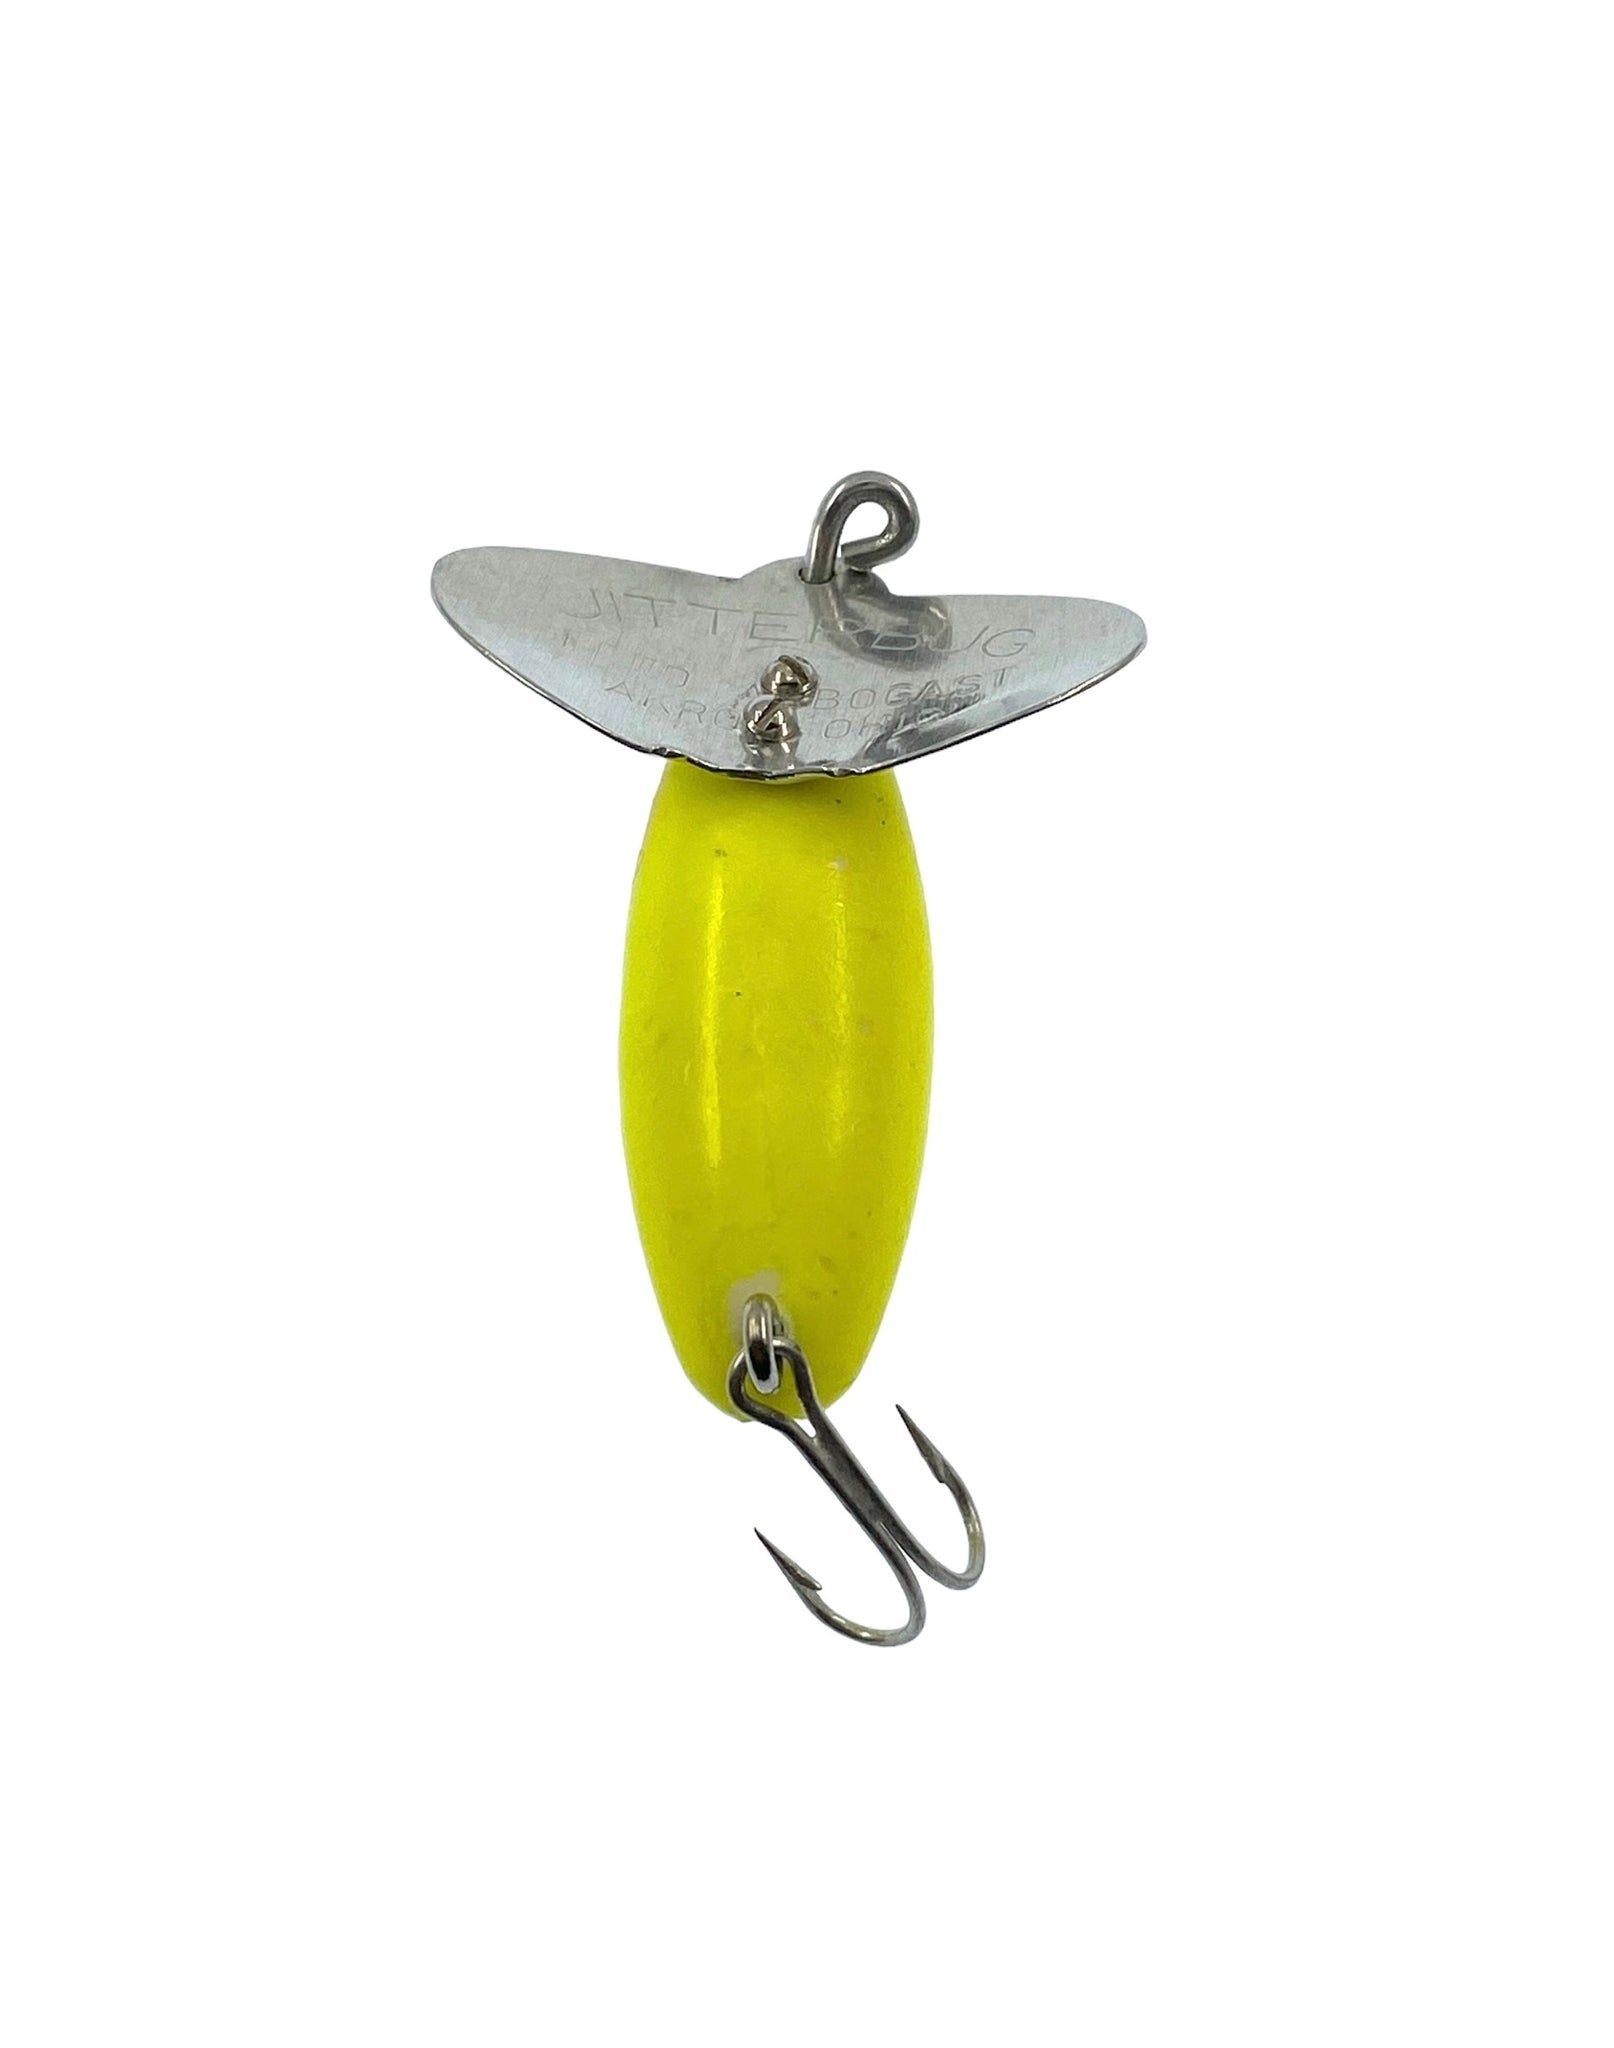 https://toadtackle.net/cdn/shop/products/image_645d493f-7f43-41cc-91ad-e1d8b0f3b1a5_1024x1024@2x.jpg?v=1676945433